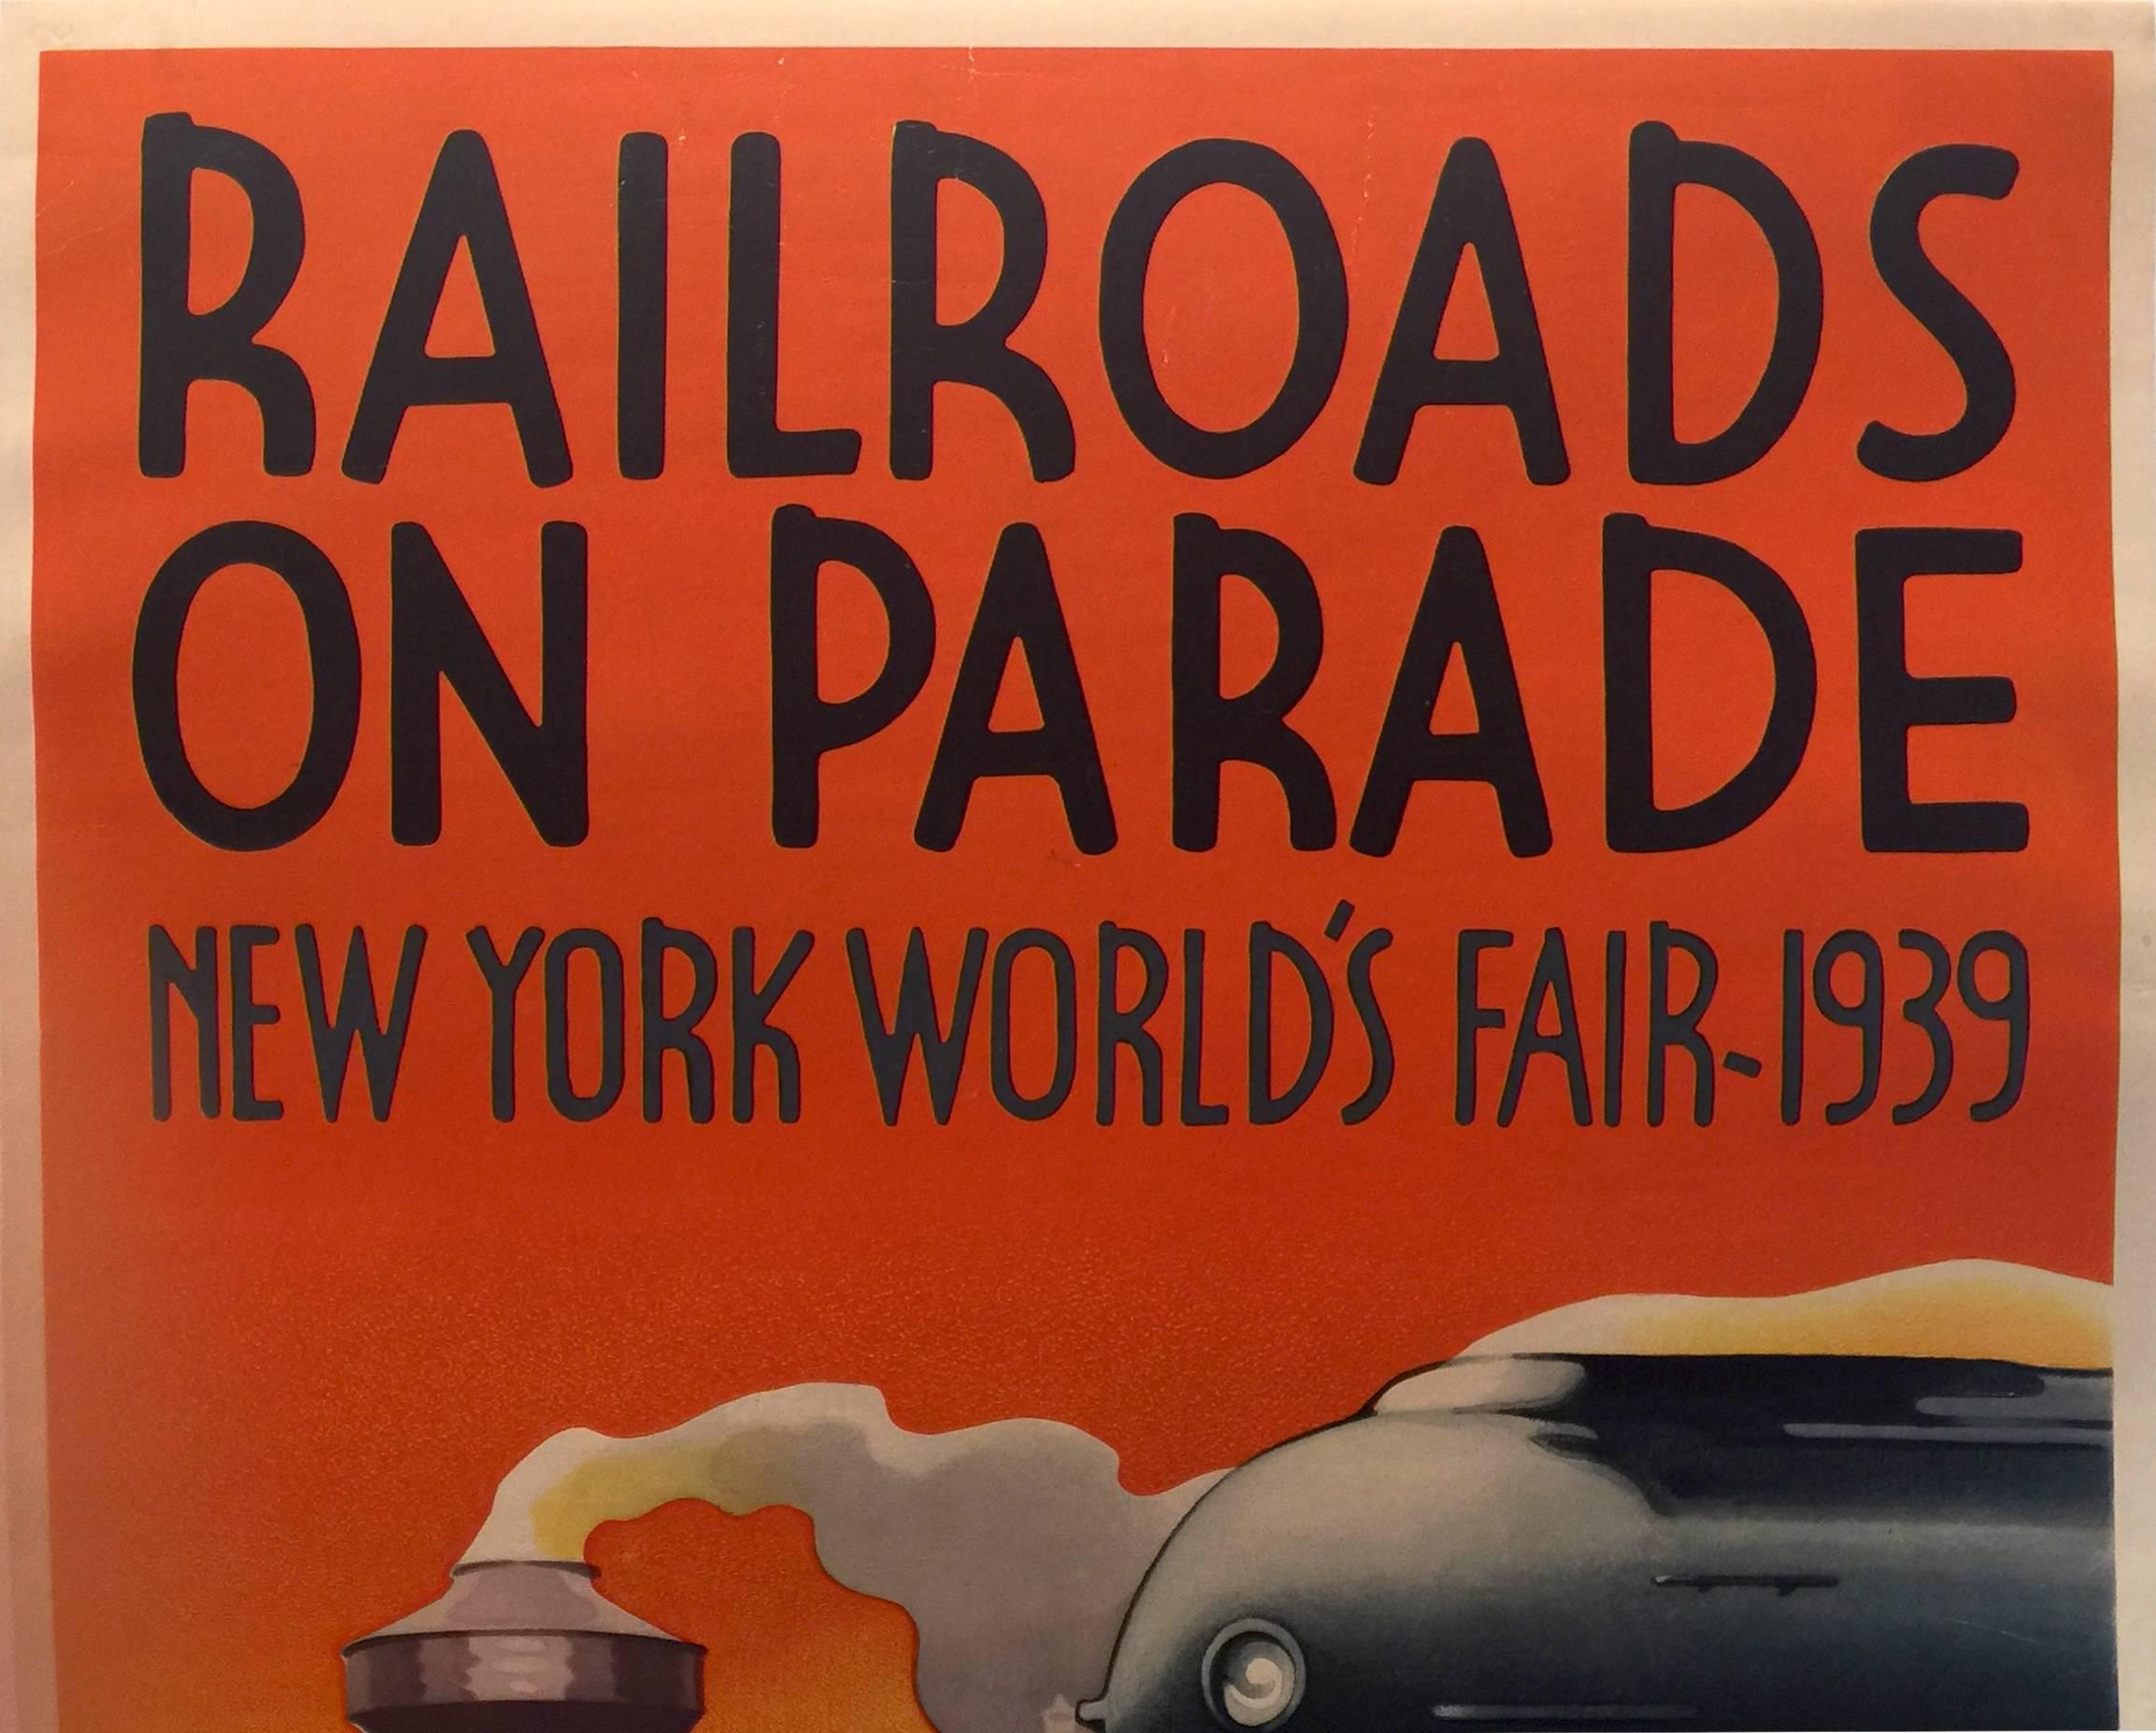 Rare American Poster for the New York World's Fair 1939, 